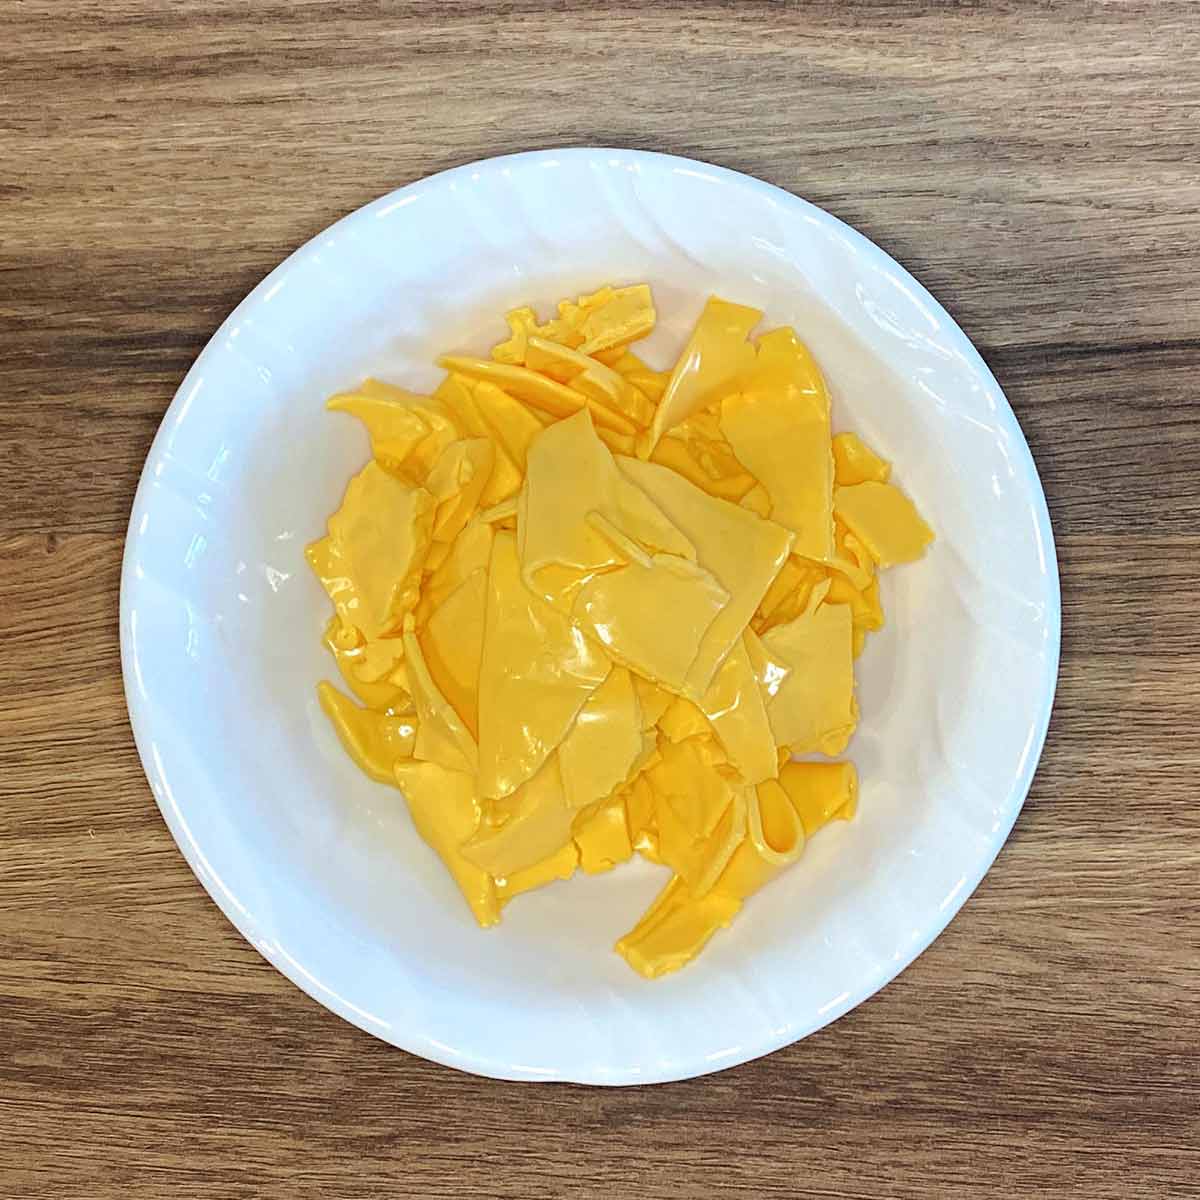 Shredded cheese slices in a white bowl.